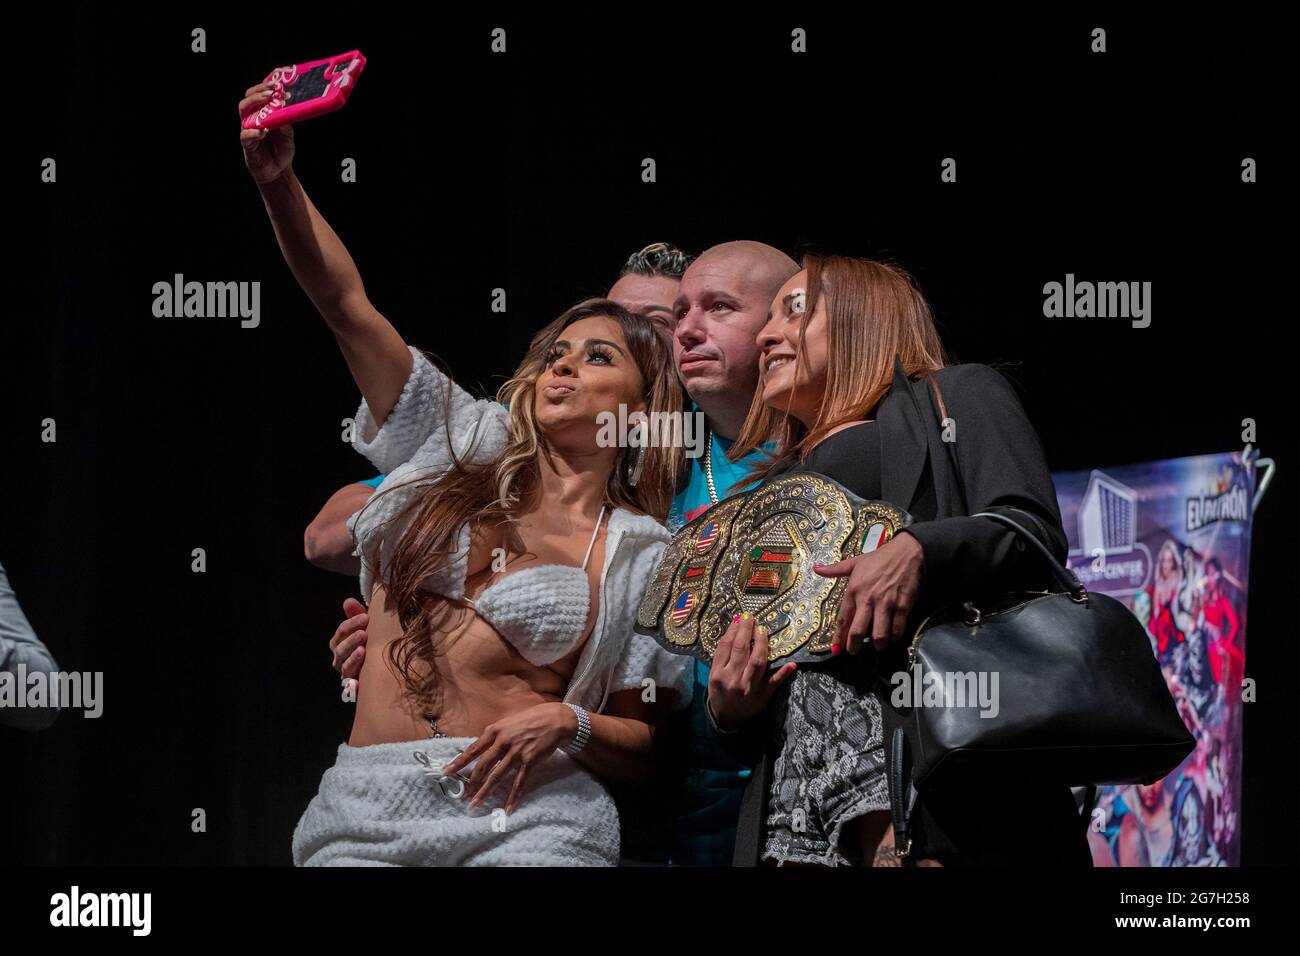 MEXICO CITY, MEXICO - JULY 13: Wrestlers Reina de Chocolate and  Diosa Quetzal take a selfie with Fernando Robles during a press conference to promote 'Made in Mexico' wrestling event by Robles Patron Promotions, with the participation of international wrestlers and legends at the Pepsi Center on July 13, 2021 in Mexico City, Mexico. (Photo by Eyepix/Sipa USA) Stock Photo